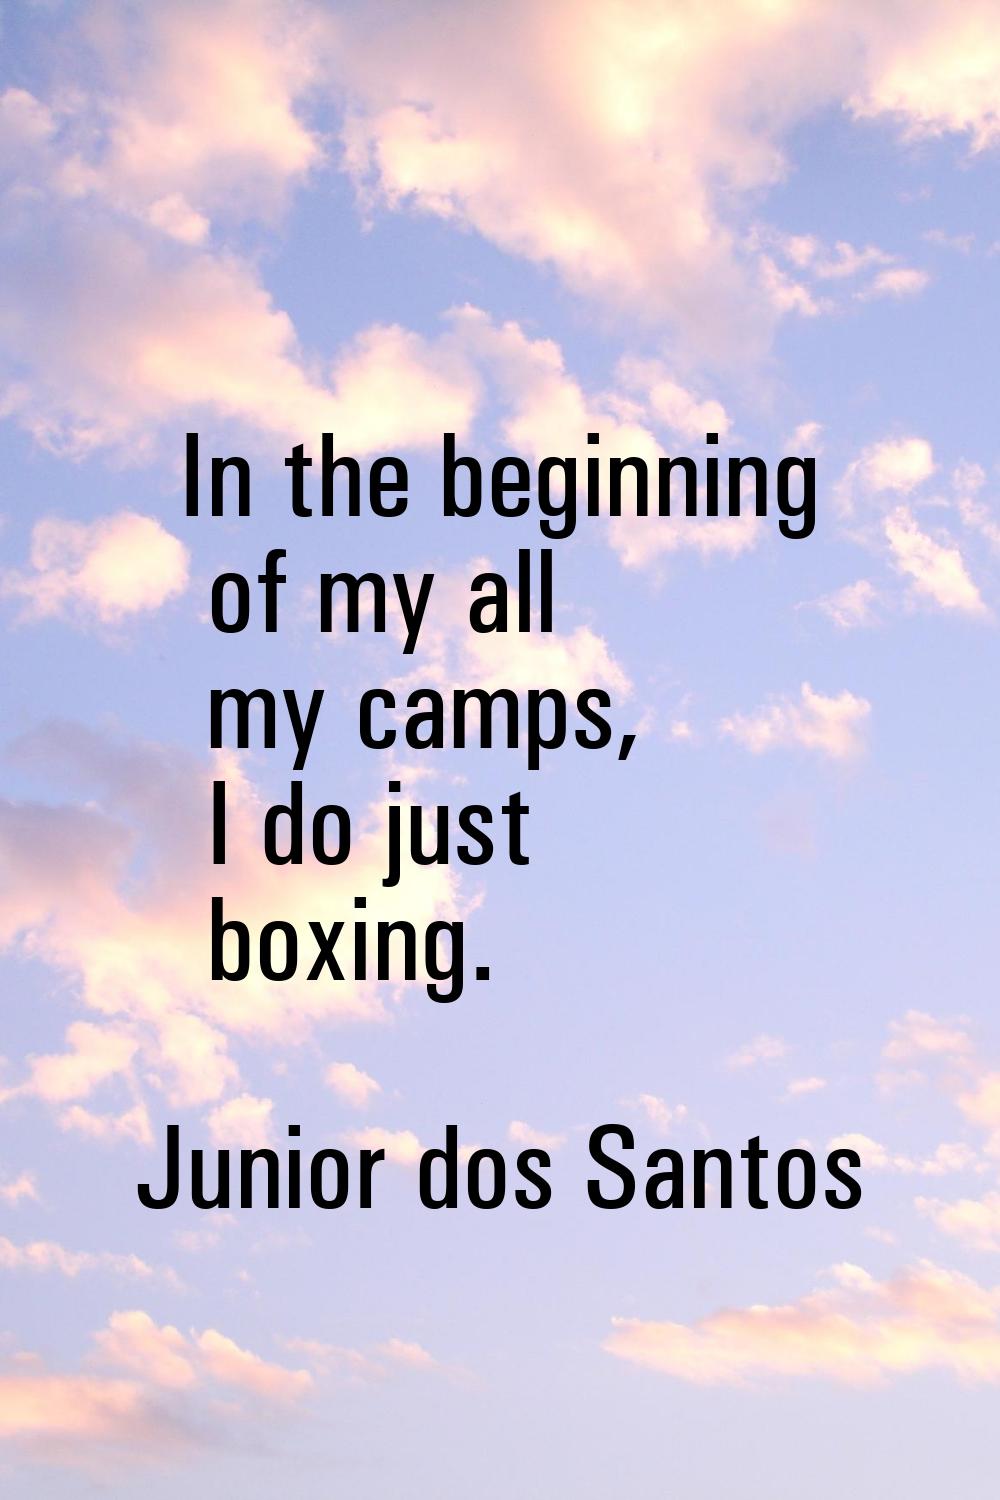 In the beginning of my all my camps, I do just boxing.